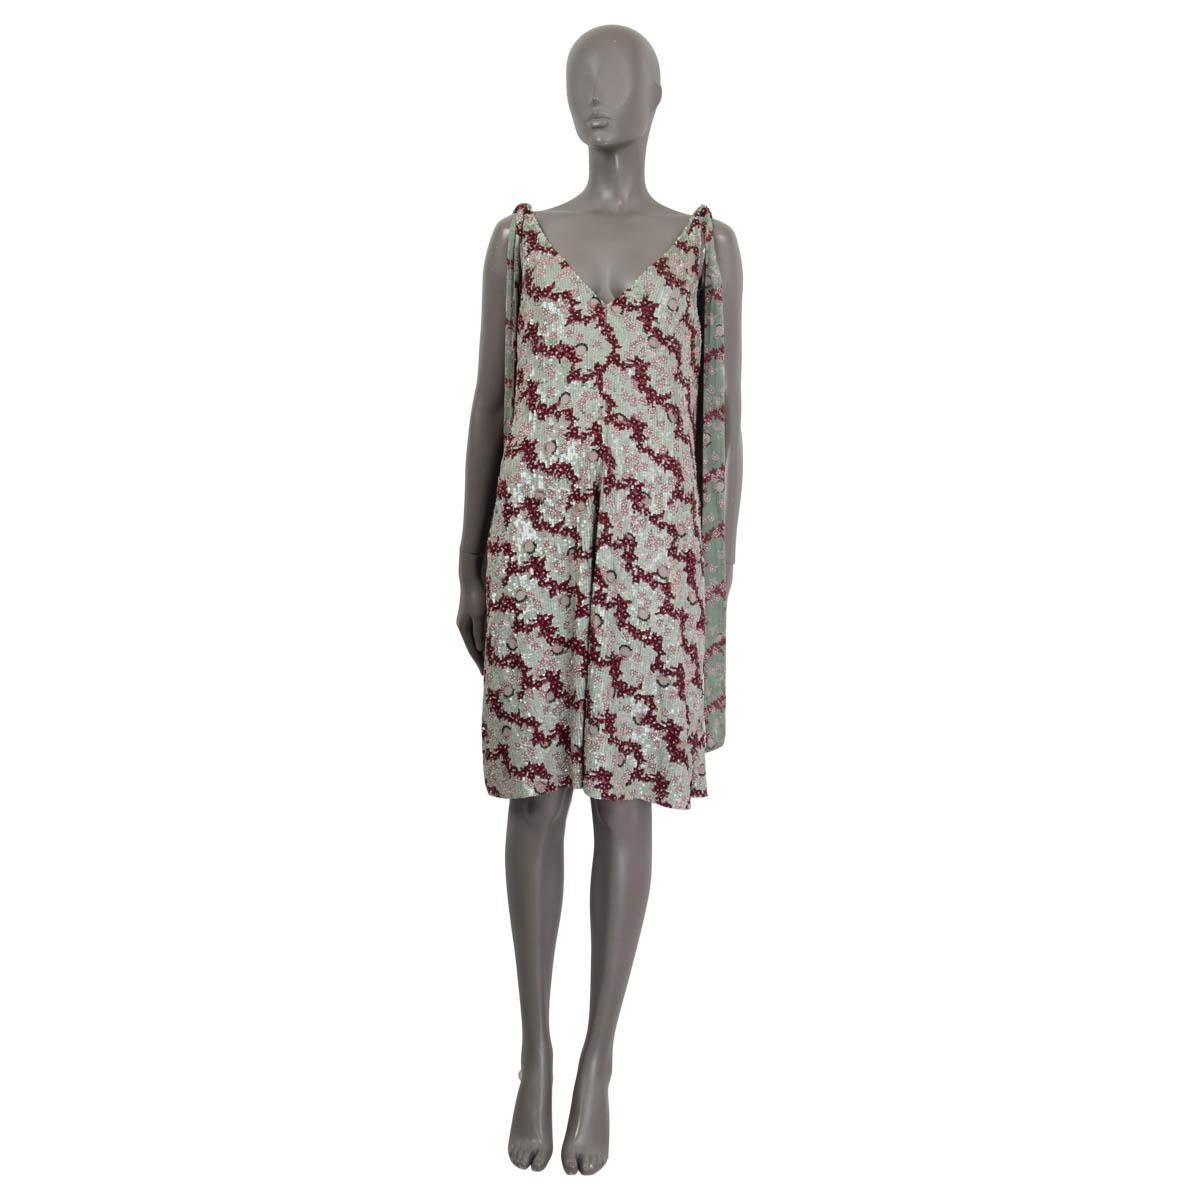 100% authentic Valentino sleeveless knee length dress in sage, burgundy and dusty rose sequins. Comes with a v-neck and sequin embellished bands on both shoulders. Opens with a concealed zipper and a hook on the side. Lined in silk (91%) and